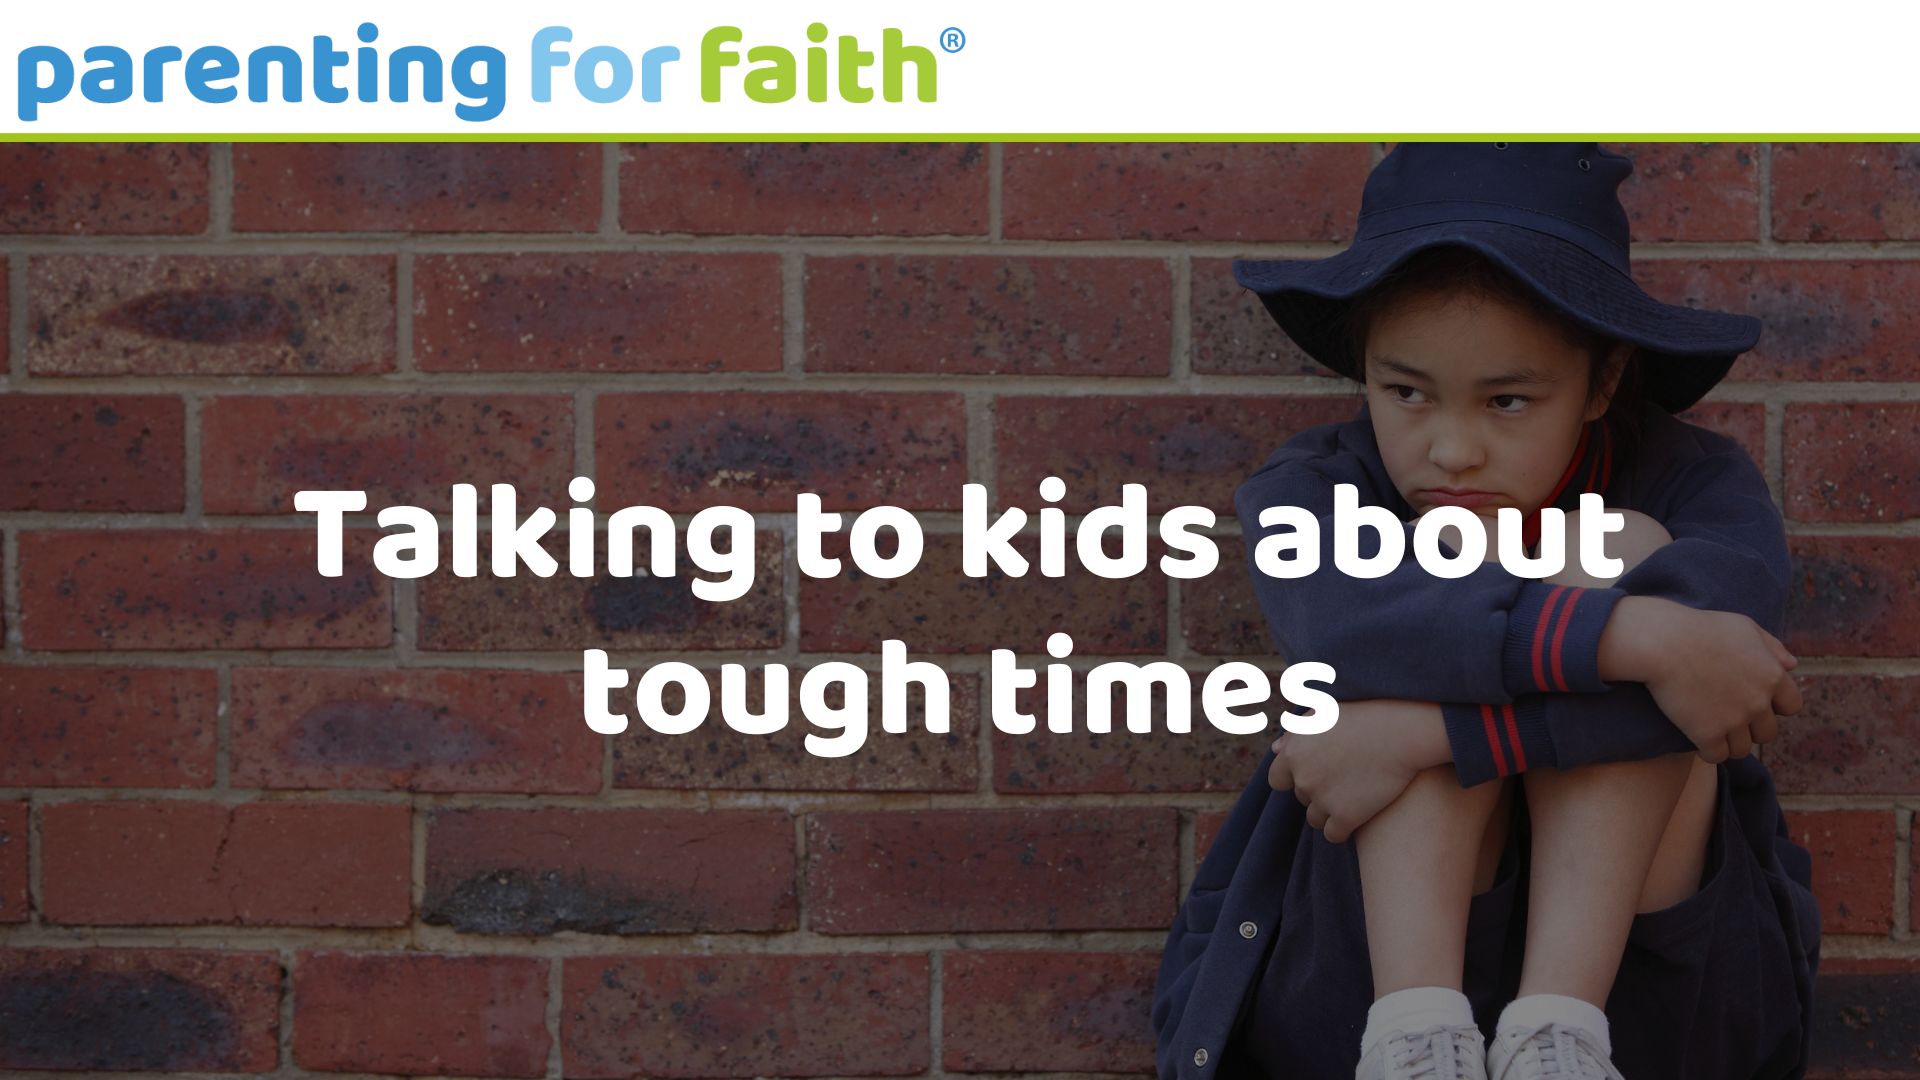 Talking to kids about tough times image credit CraigRJD from Getty Images Signature